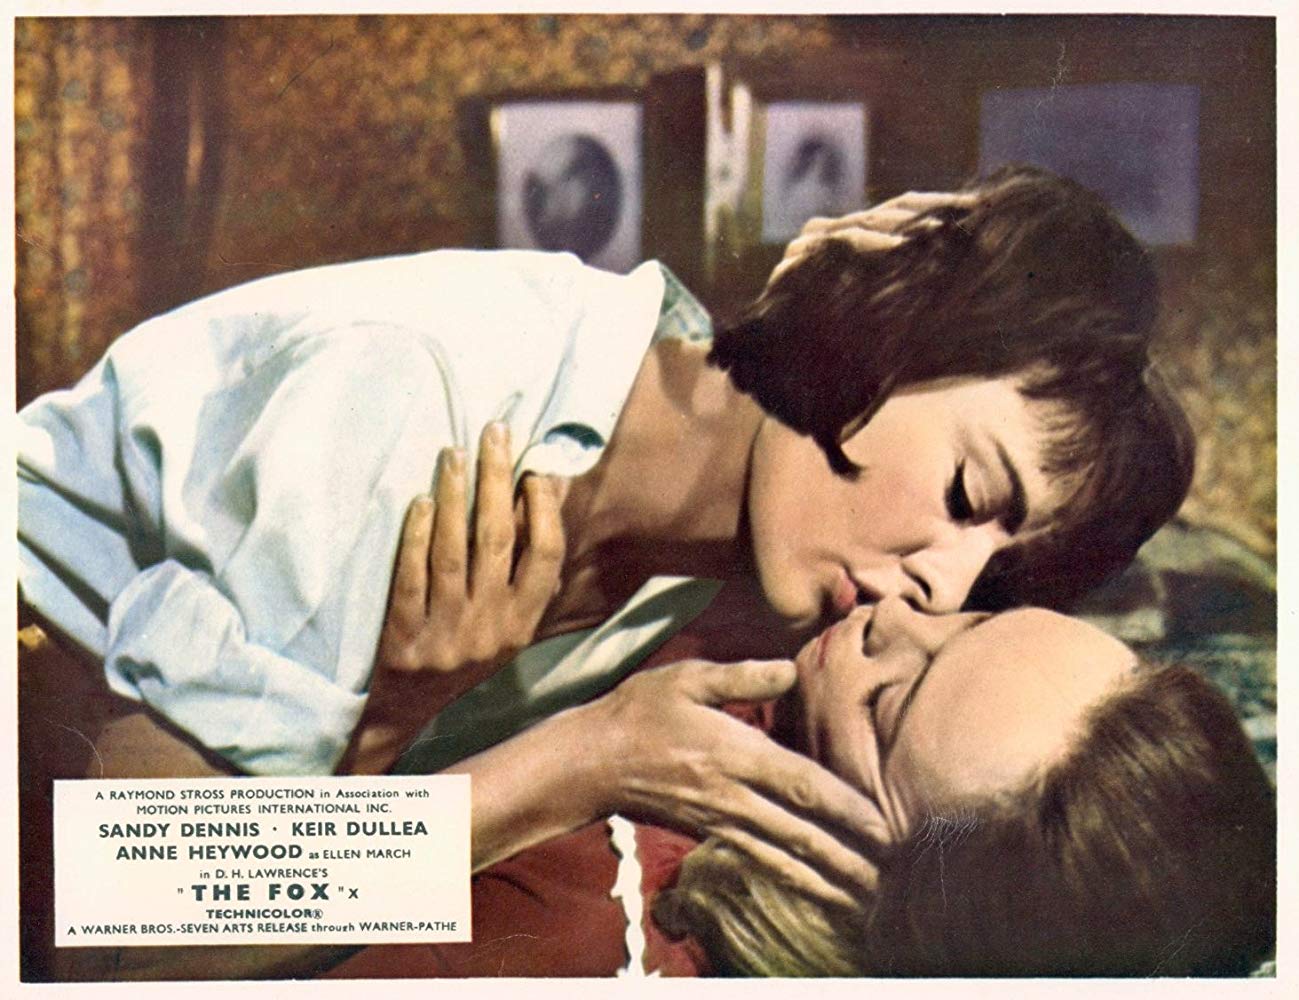 Image of the two women of The Fox kissing each other in a living room.